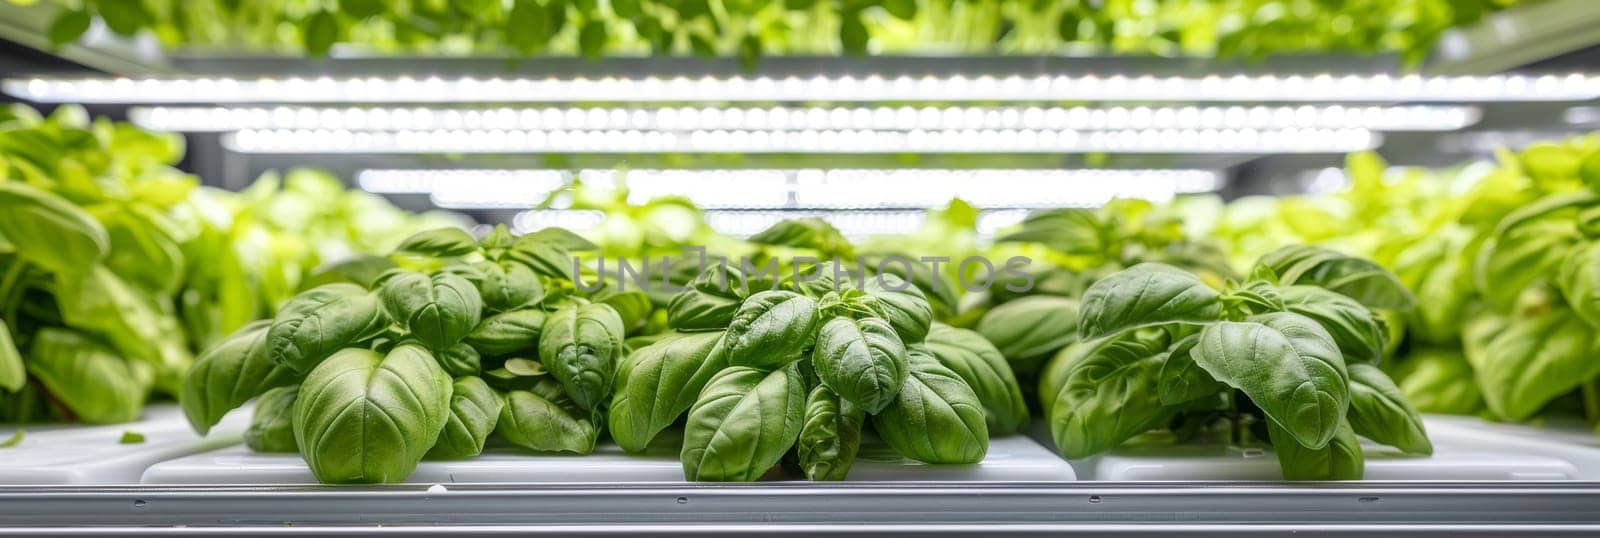 A bountiful indoor hydroponic farm filled with rows of vibrant, fresh basil plants thriving under LED grow lights. by sfinks